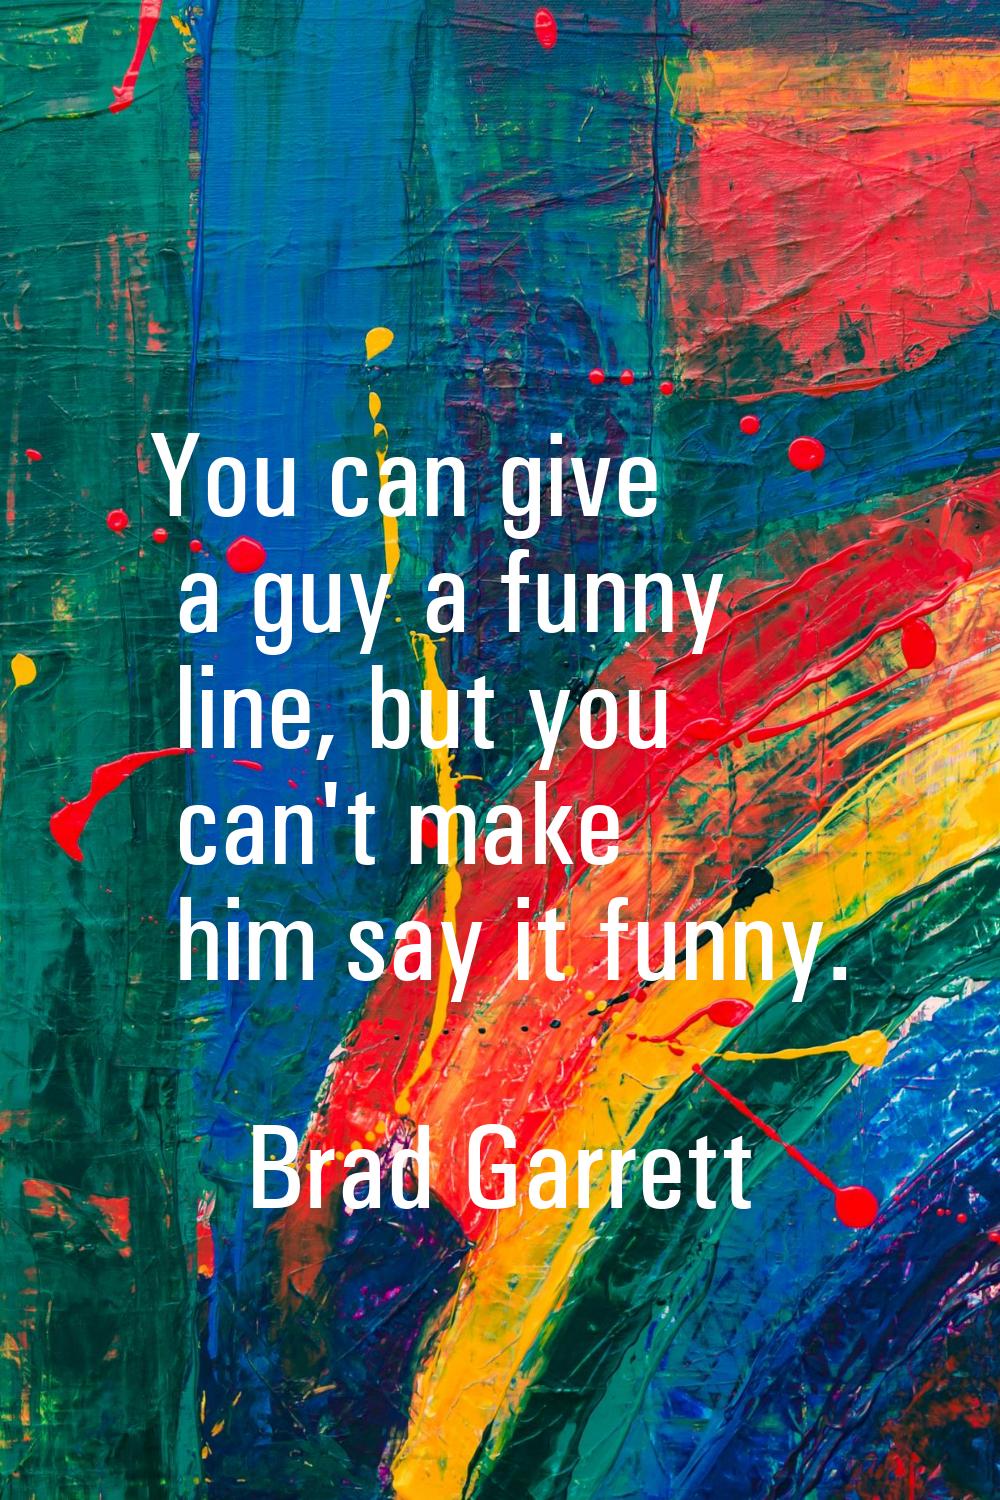 You can give a guy a funny line, but you can't make him say it funny.